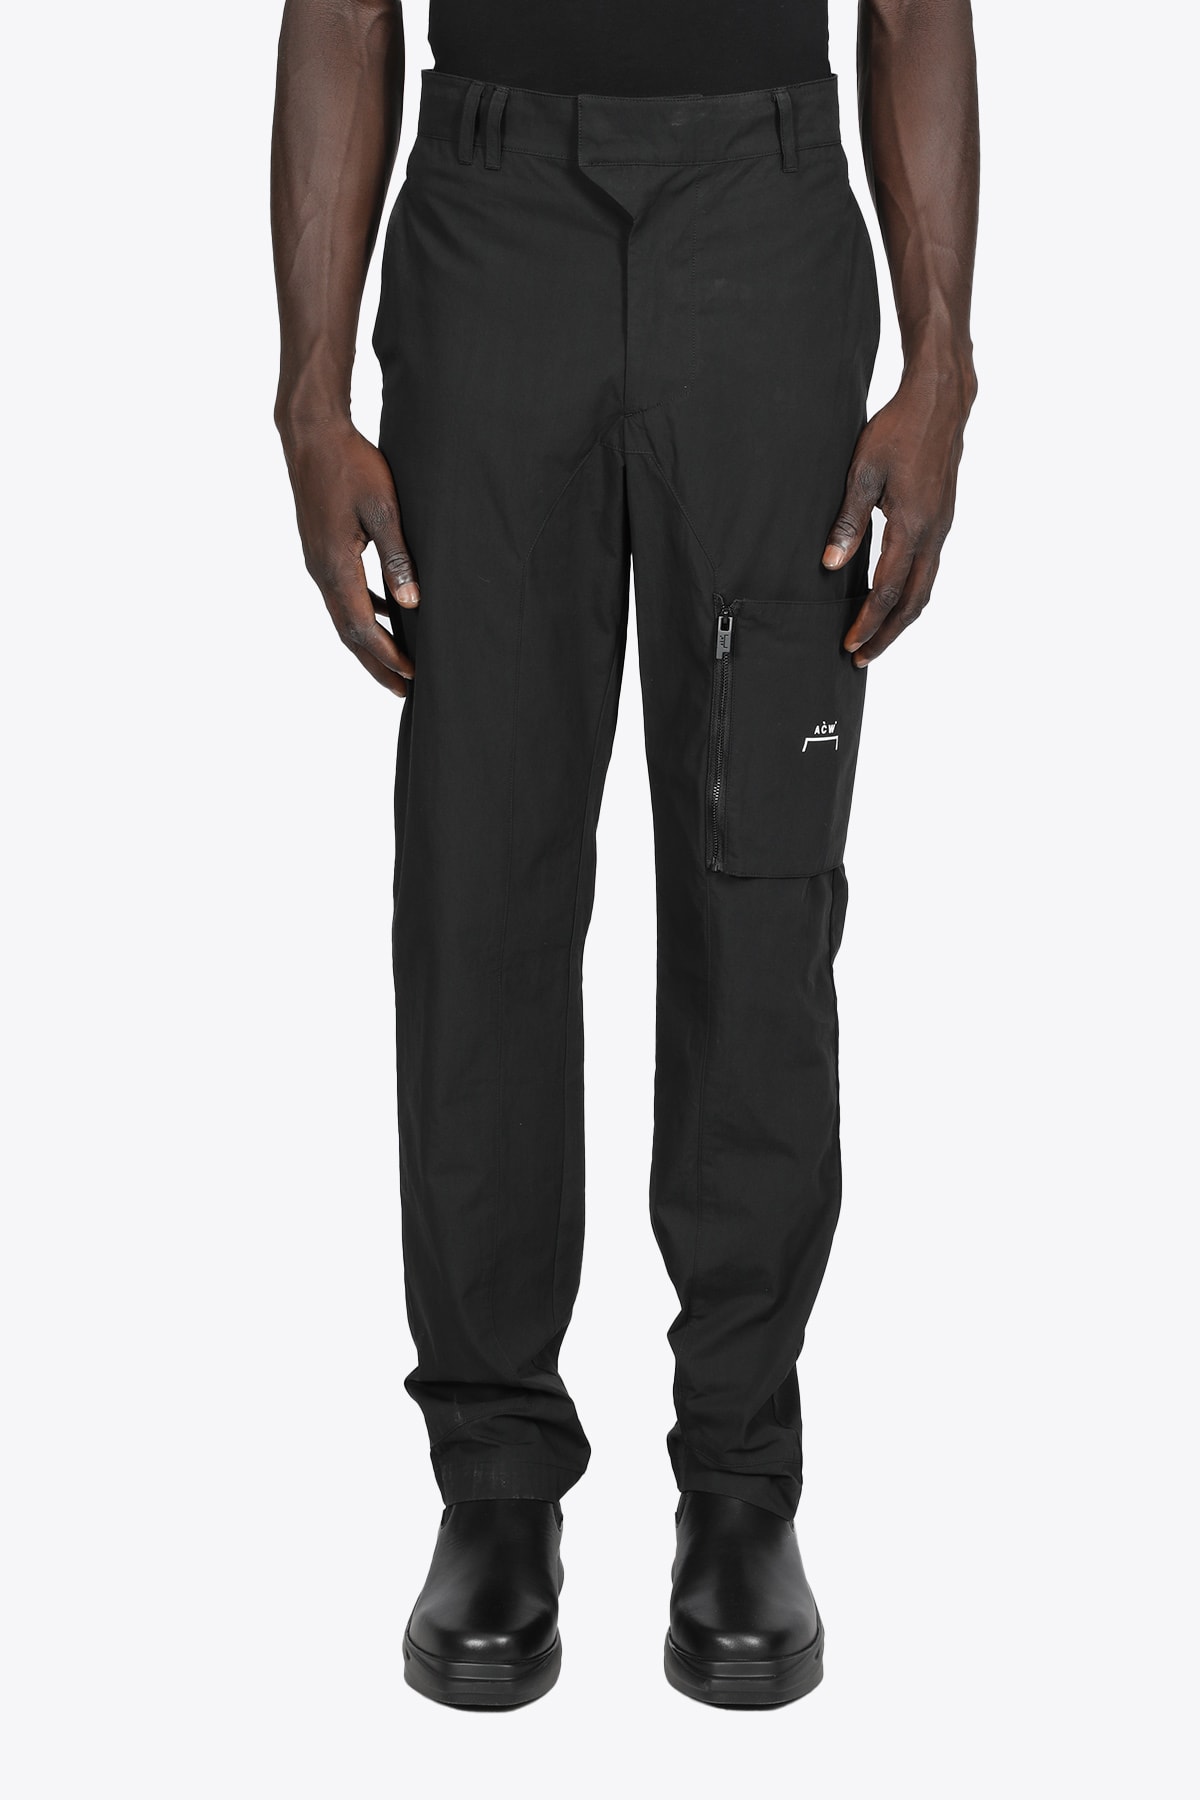 A-COLD-WALL Circuit Cargo Pants Black poplin cargo pant with logo